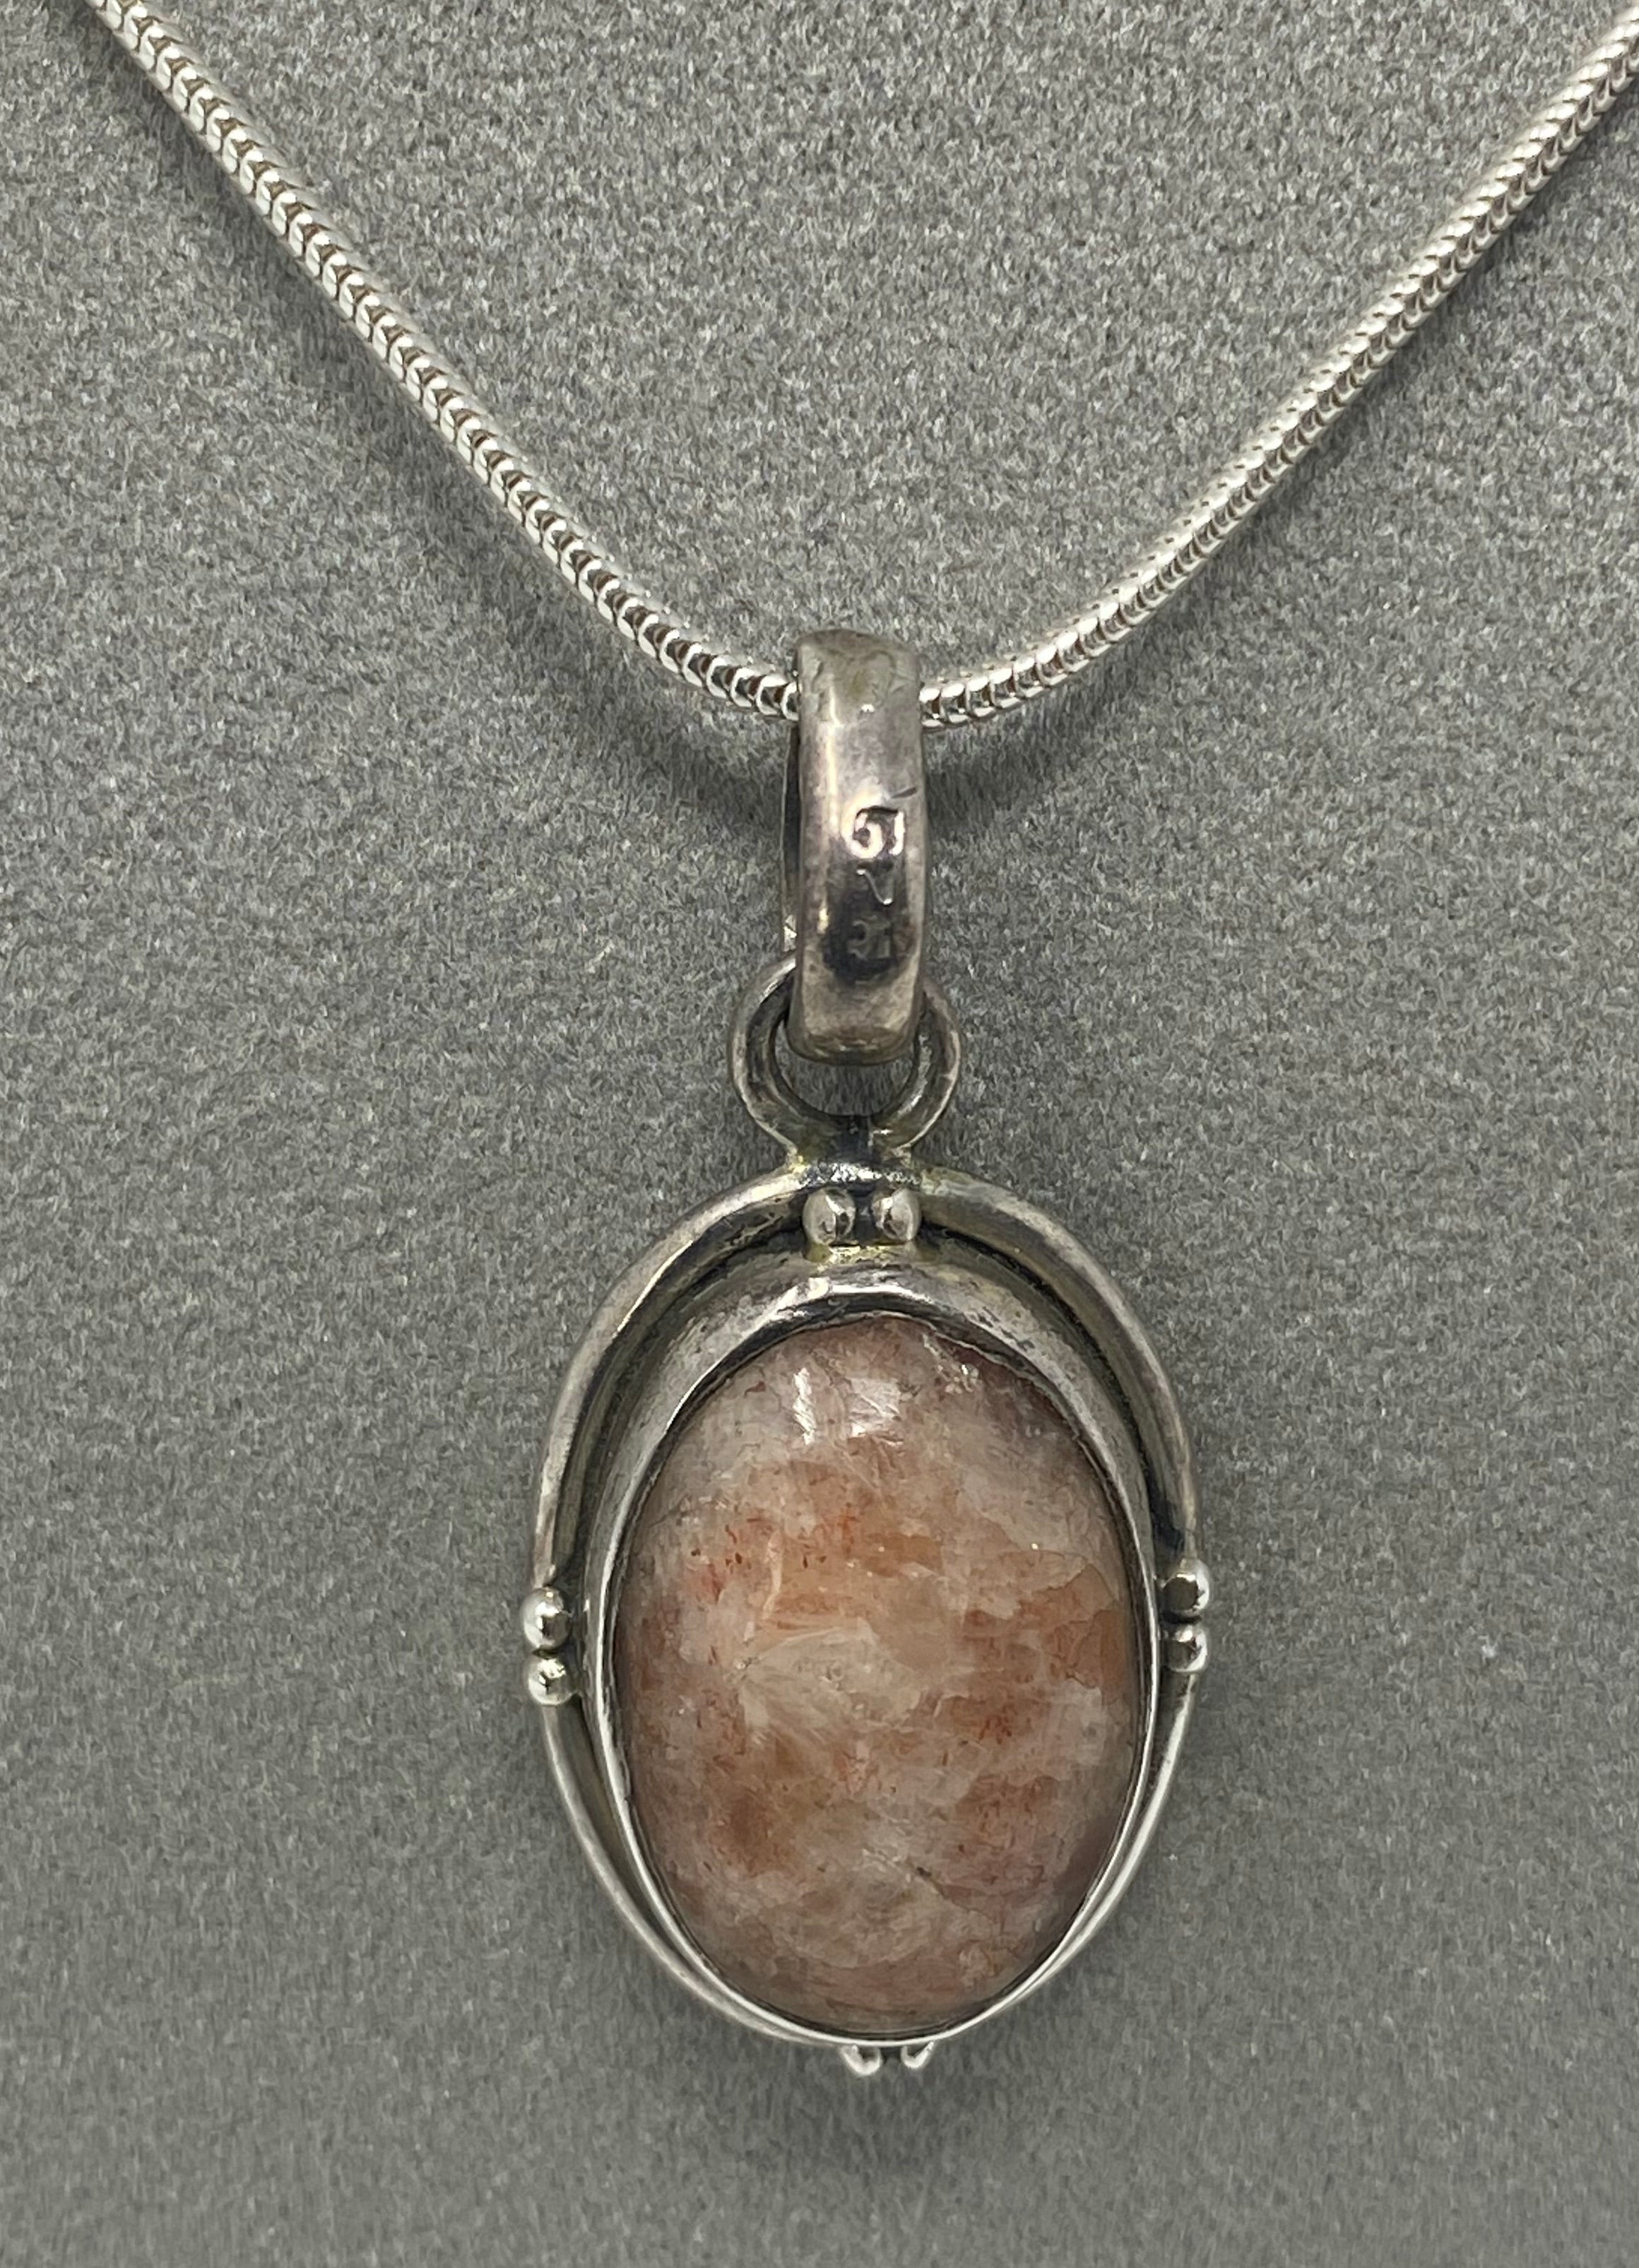 Silver and Oval Jasper Stone Necklace on Silver Chain